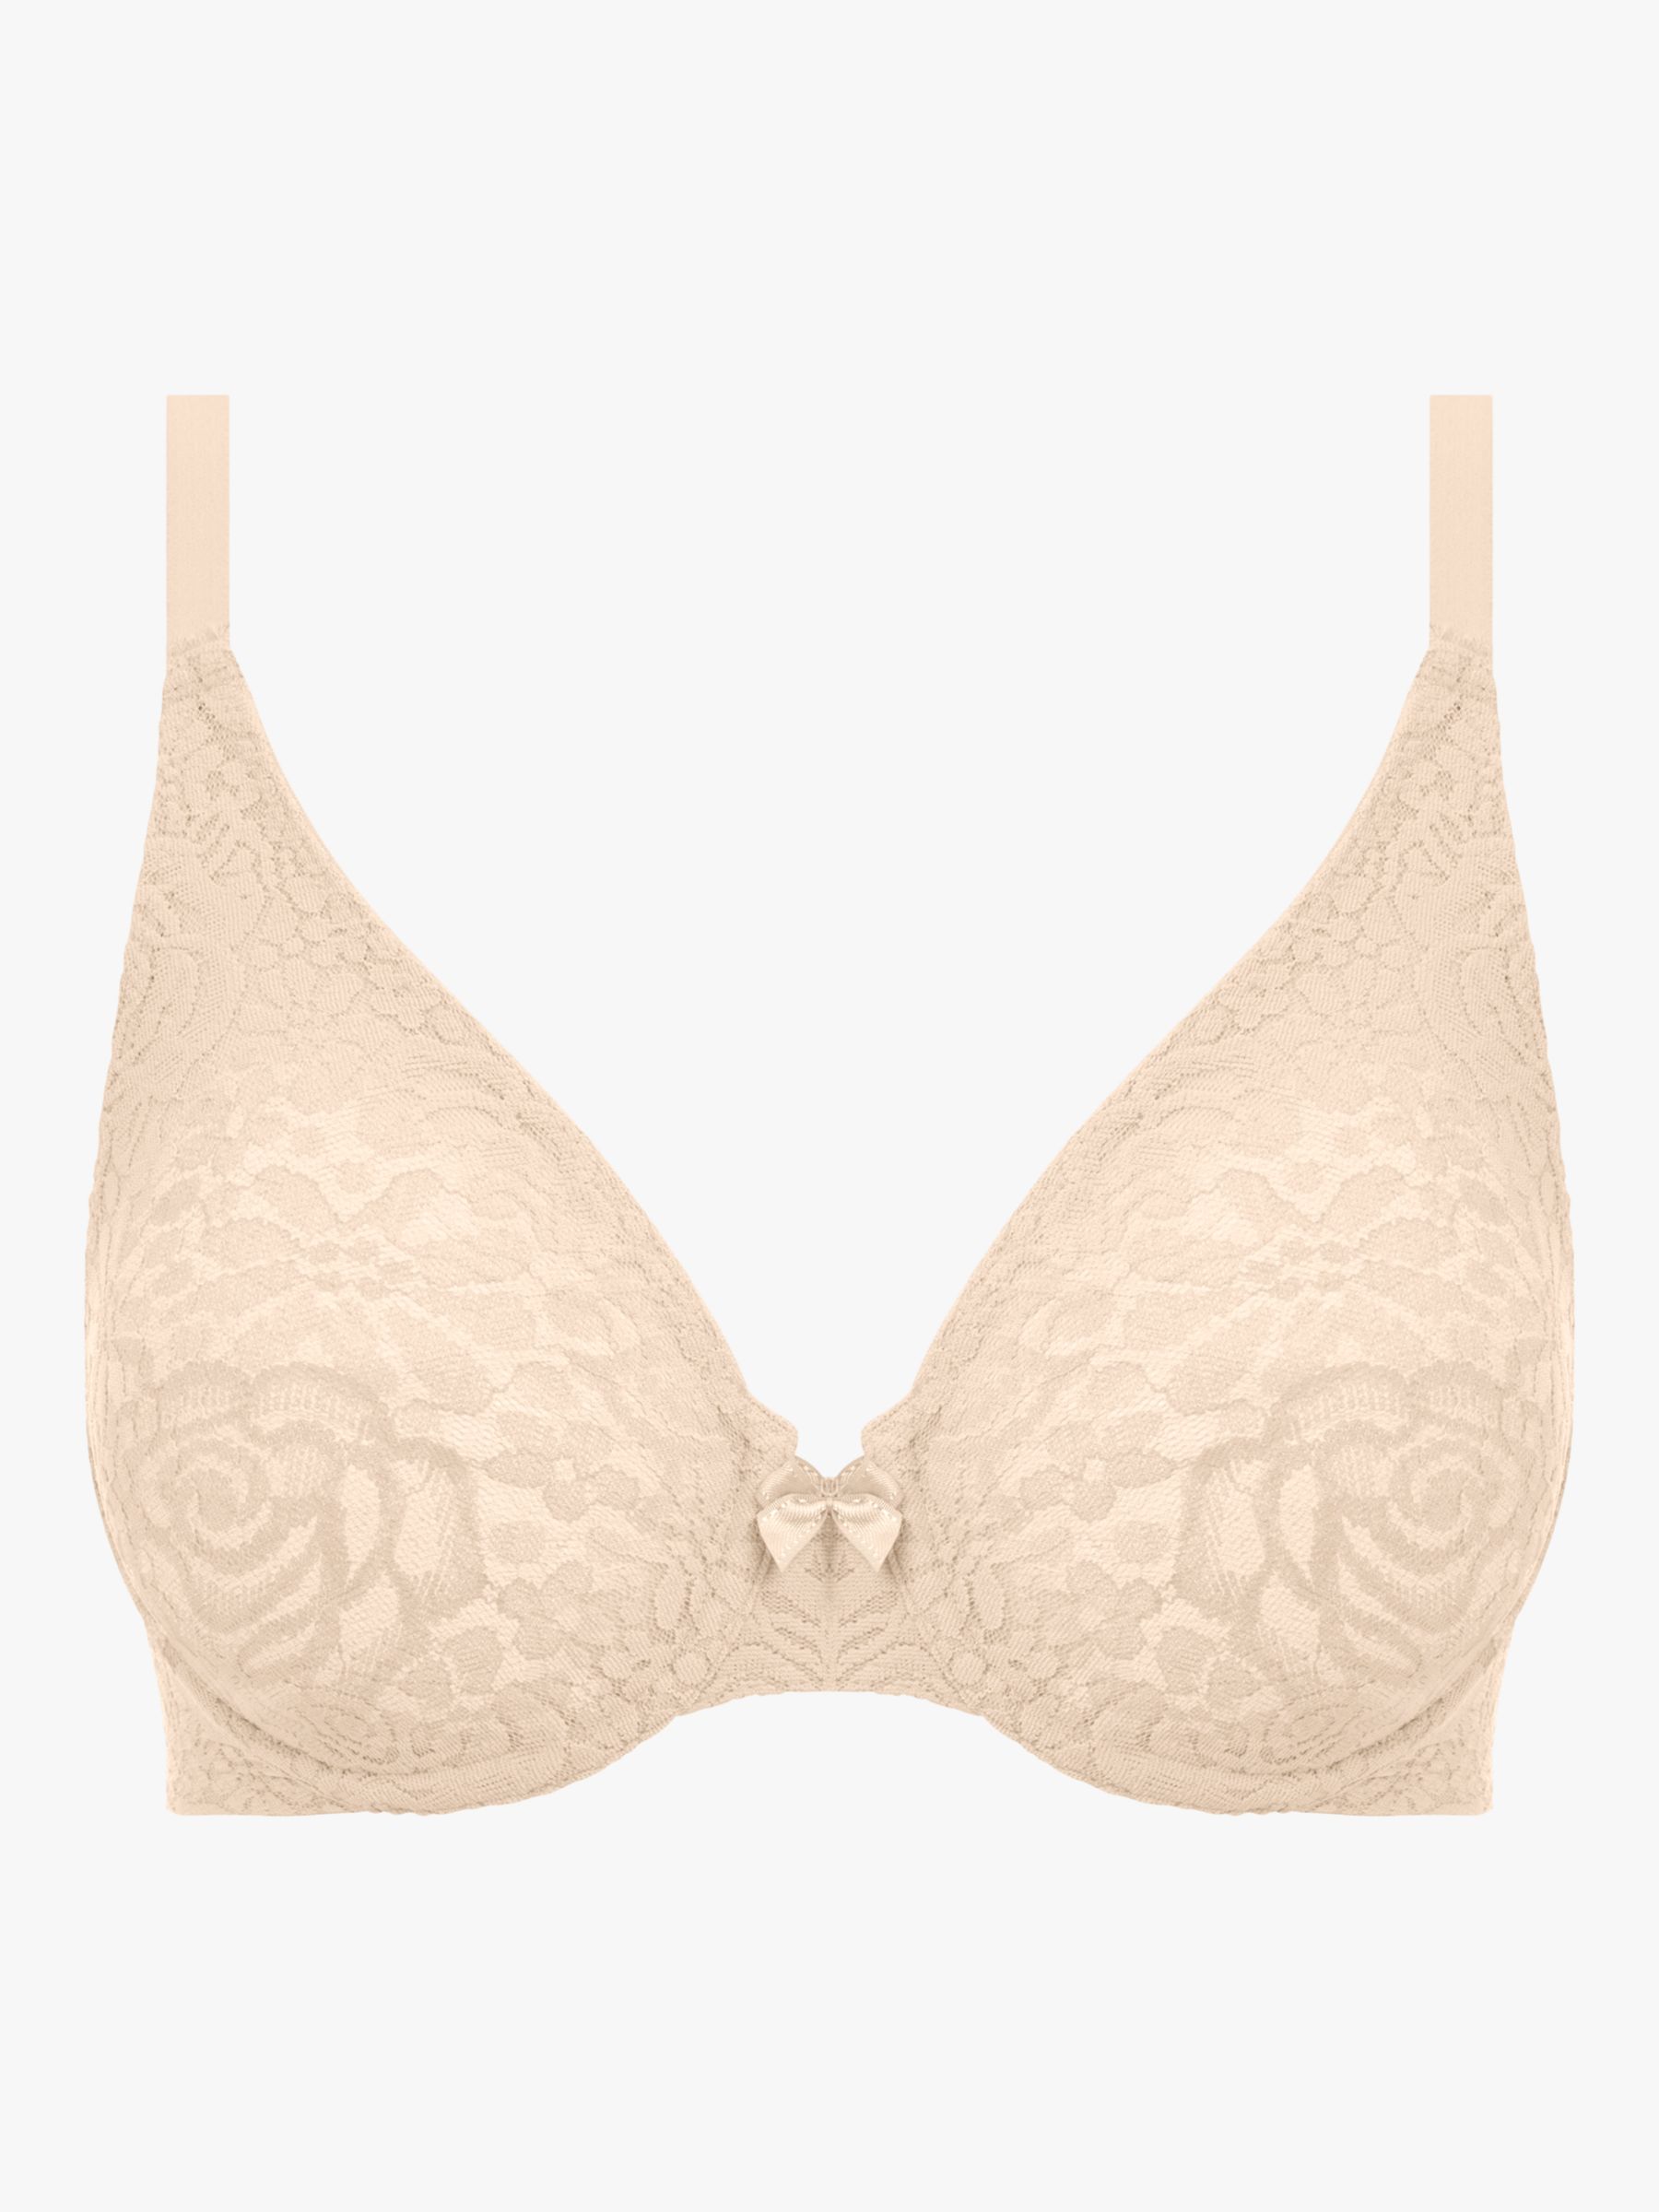 Buy Wacoal Halo Lace Underwired Bra Online at johnlewis.com